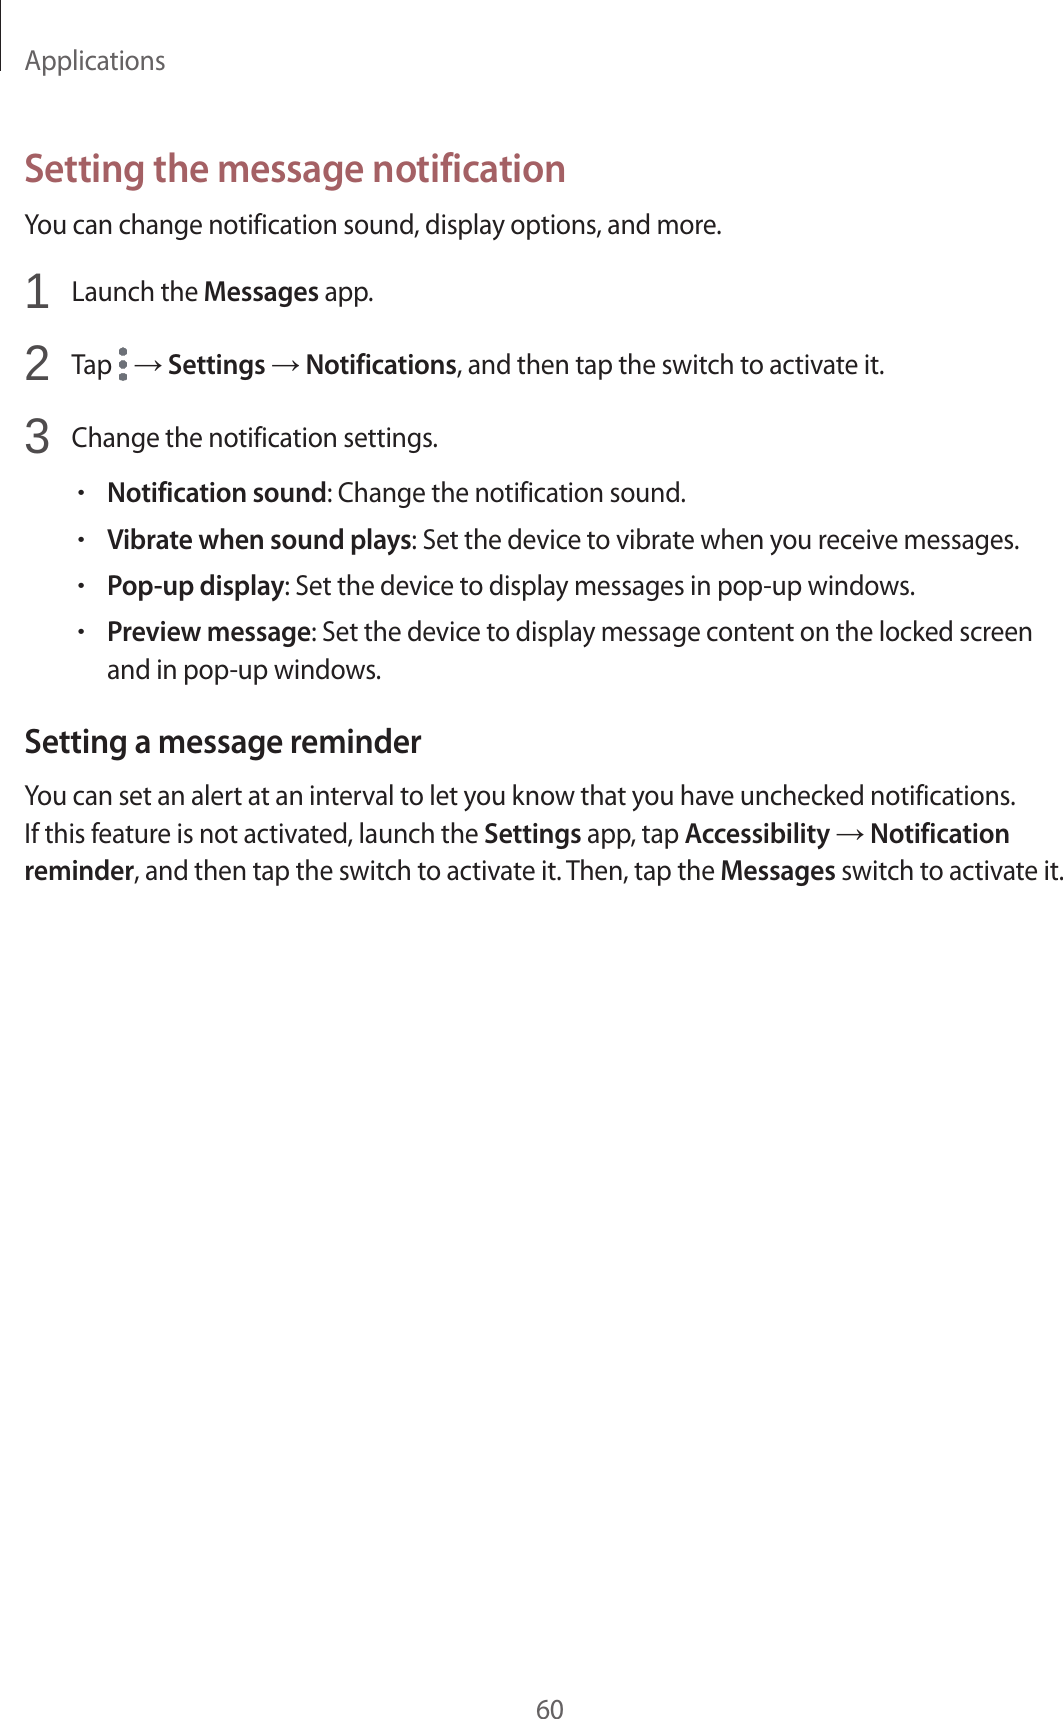 Applications60Setting the message notificationYou can change notification sound, display options, and more.1  Launch the Messages app.2  Tap   → Settings → Notifications, and then tap the switch to activate it.3  Change the notification settings.•Notification sound: Change the notification sound.•Vibrate when sound plays: Set the device to vibrate when you receive messages.•Pop-up display: Set the device to display messages in pop-up windows.•Preview message: Set the device to display message content on the locked screen and in pop-up windows.Setting a message reminderYou can set an alert at an interval to let you know that you have unchecked notifications. If this feature is not activated, launch the Settings app, tap Accessibility → Notification reminder, and then tap the switch to activate it. Then, tap the Messages switch to activate it.